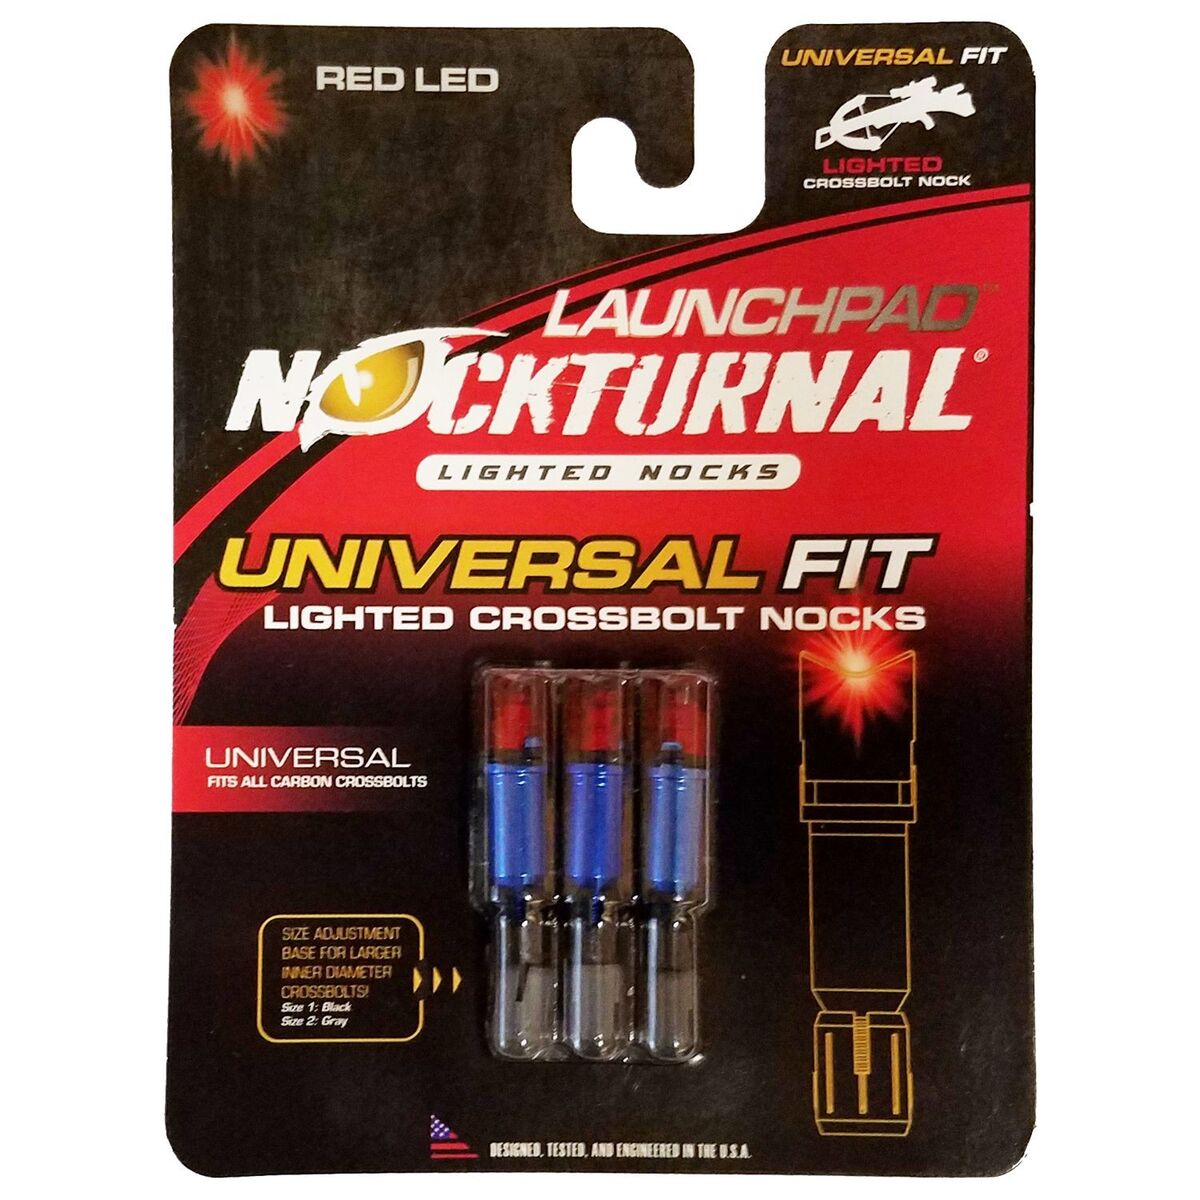 Nocturnal Launchpad Universal Lighted Crossbow Nocks